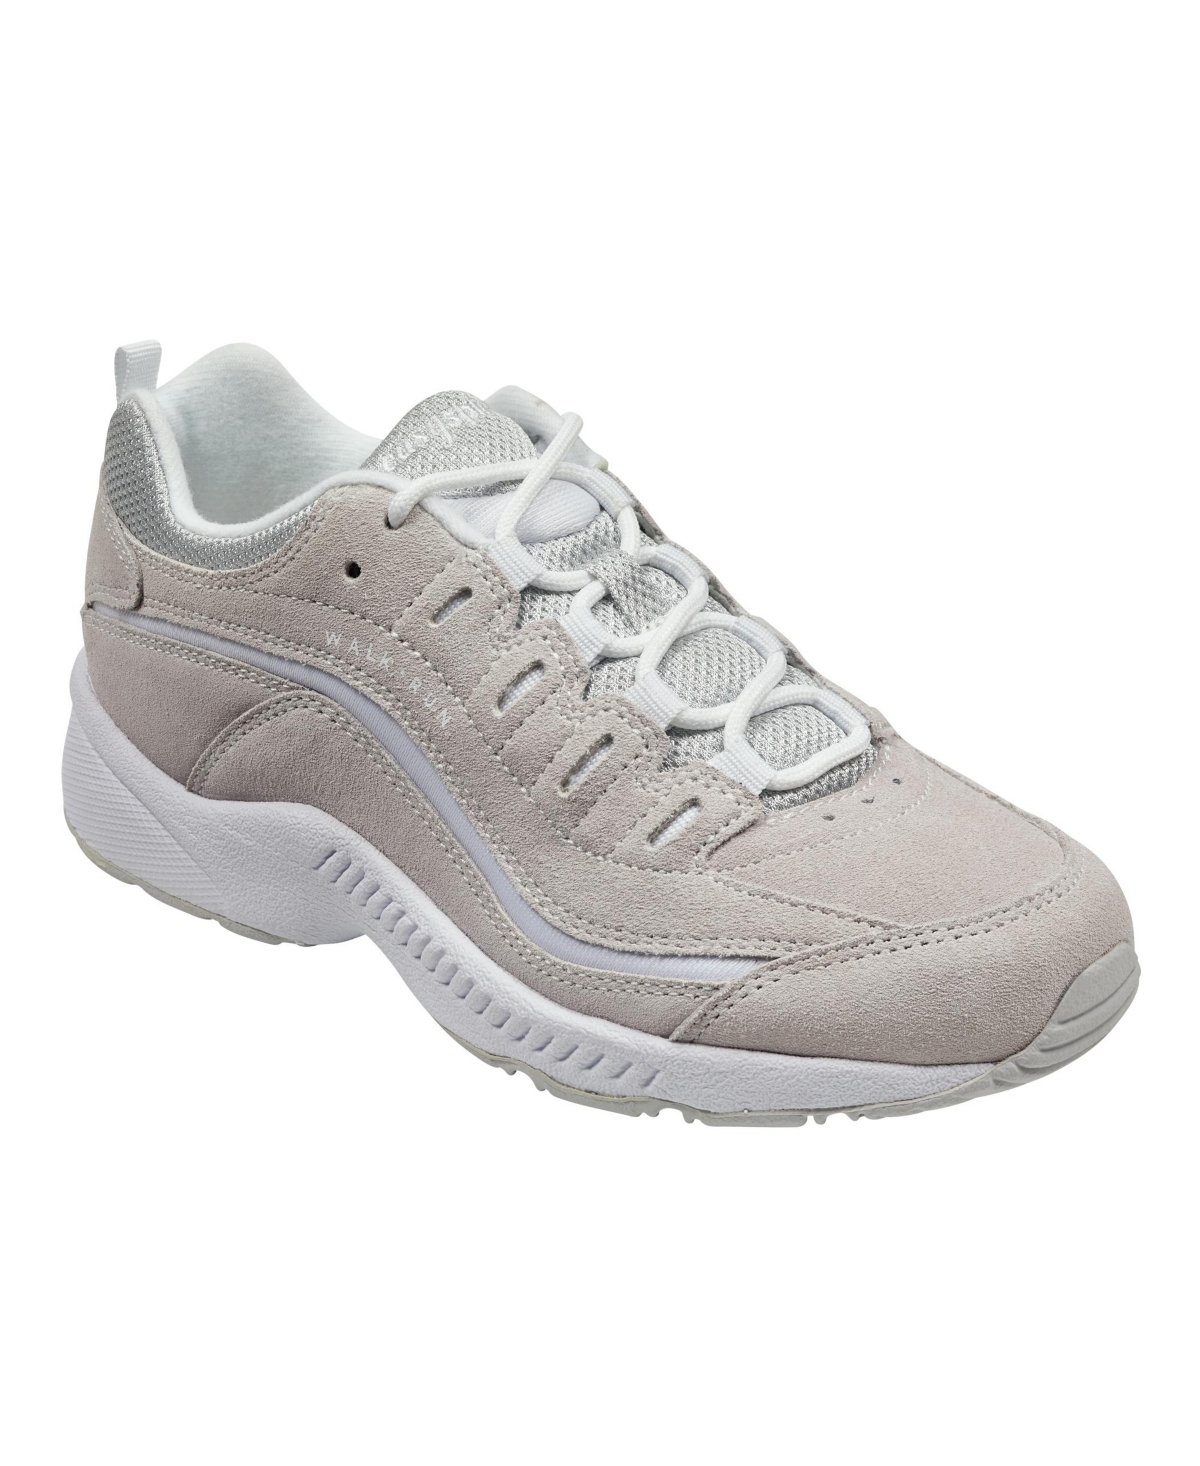 UPC 191656367071 product image for Easy Spirit Women's Romy Round Toe Casual Lace Up Walking Shoes Women's Shoes | upcitemdb.com